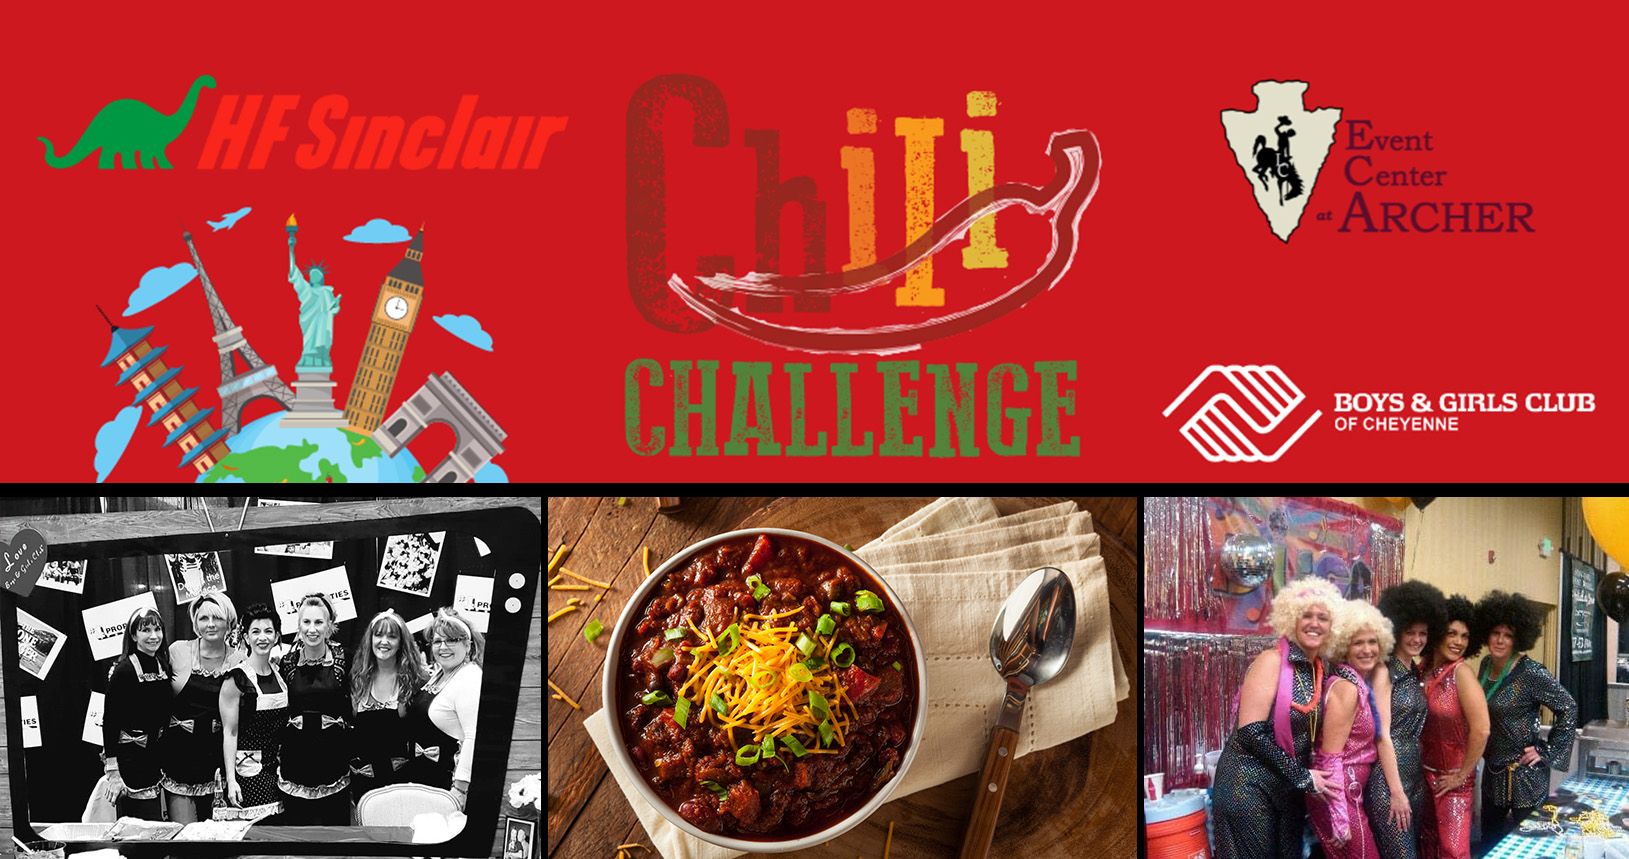 #1 Properties Gives Will Be Cooking Up A Storm For The 14th Annual Chili Challenge!